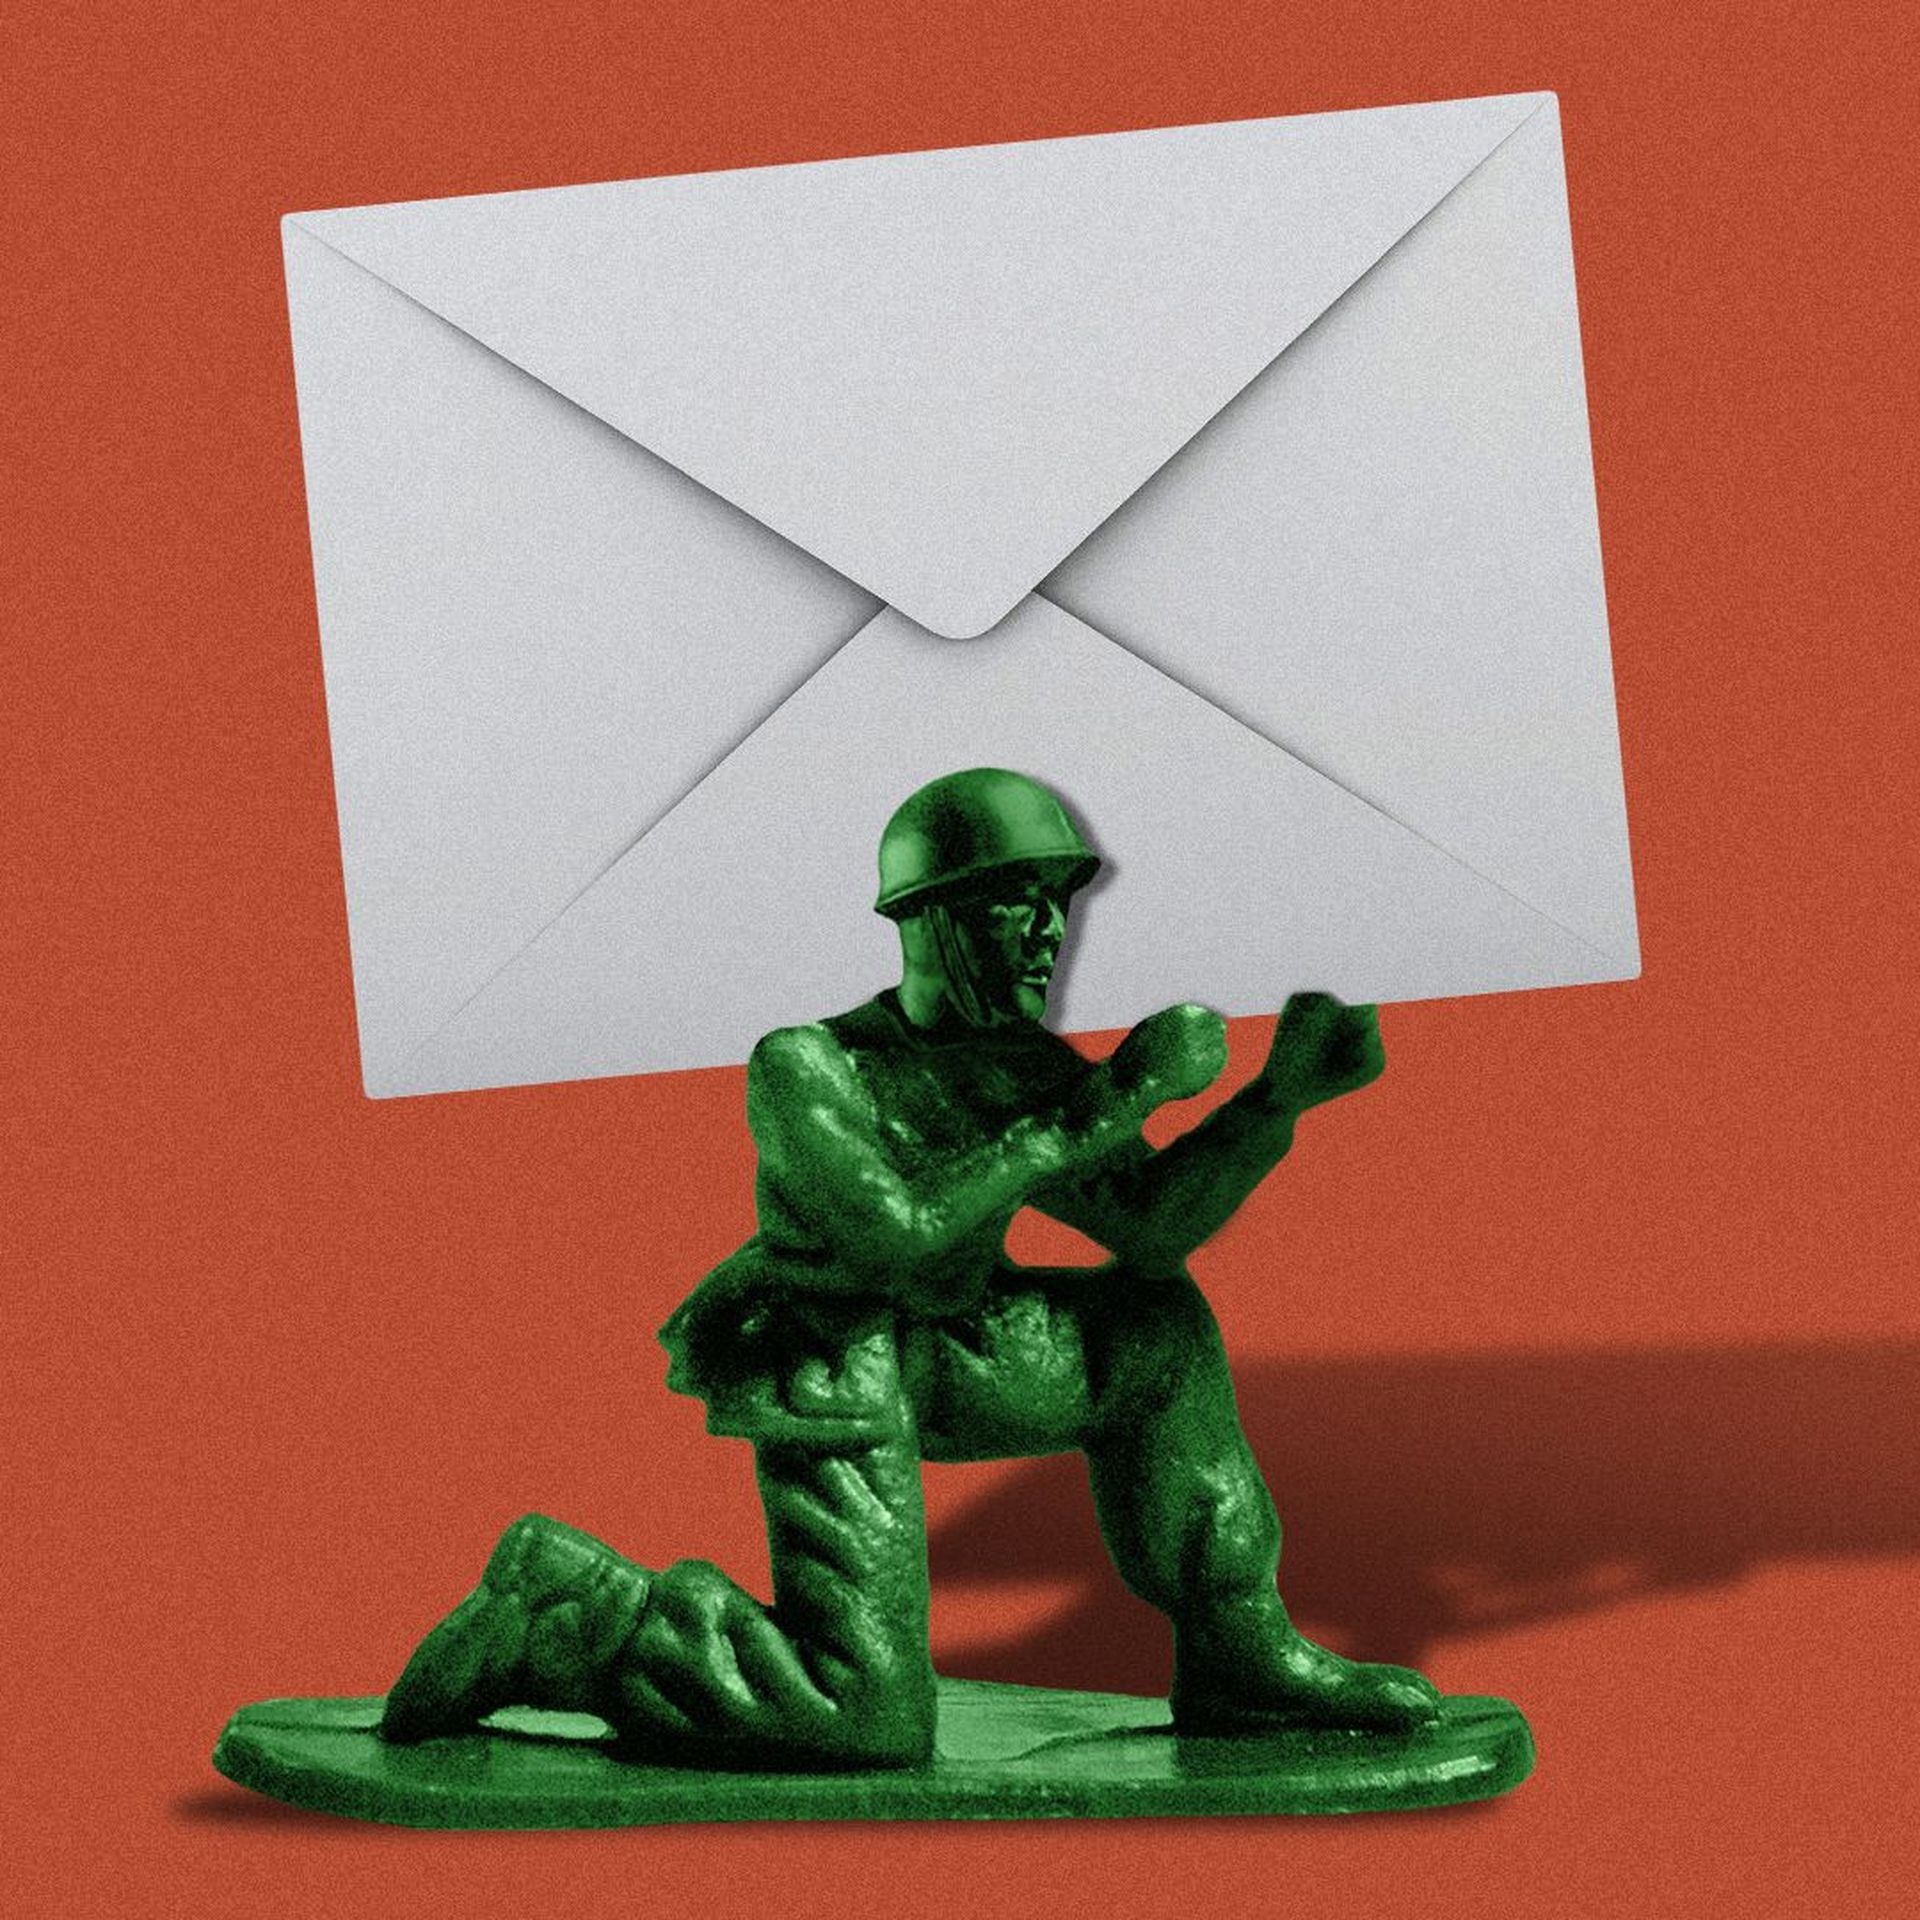 Illustration of a toy army figurine holding an envelope like a bazooka.